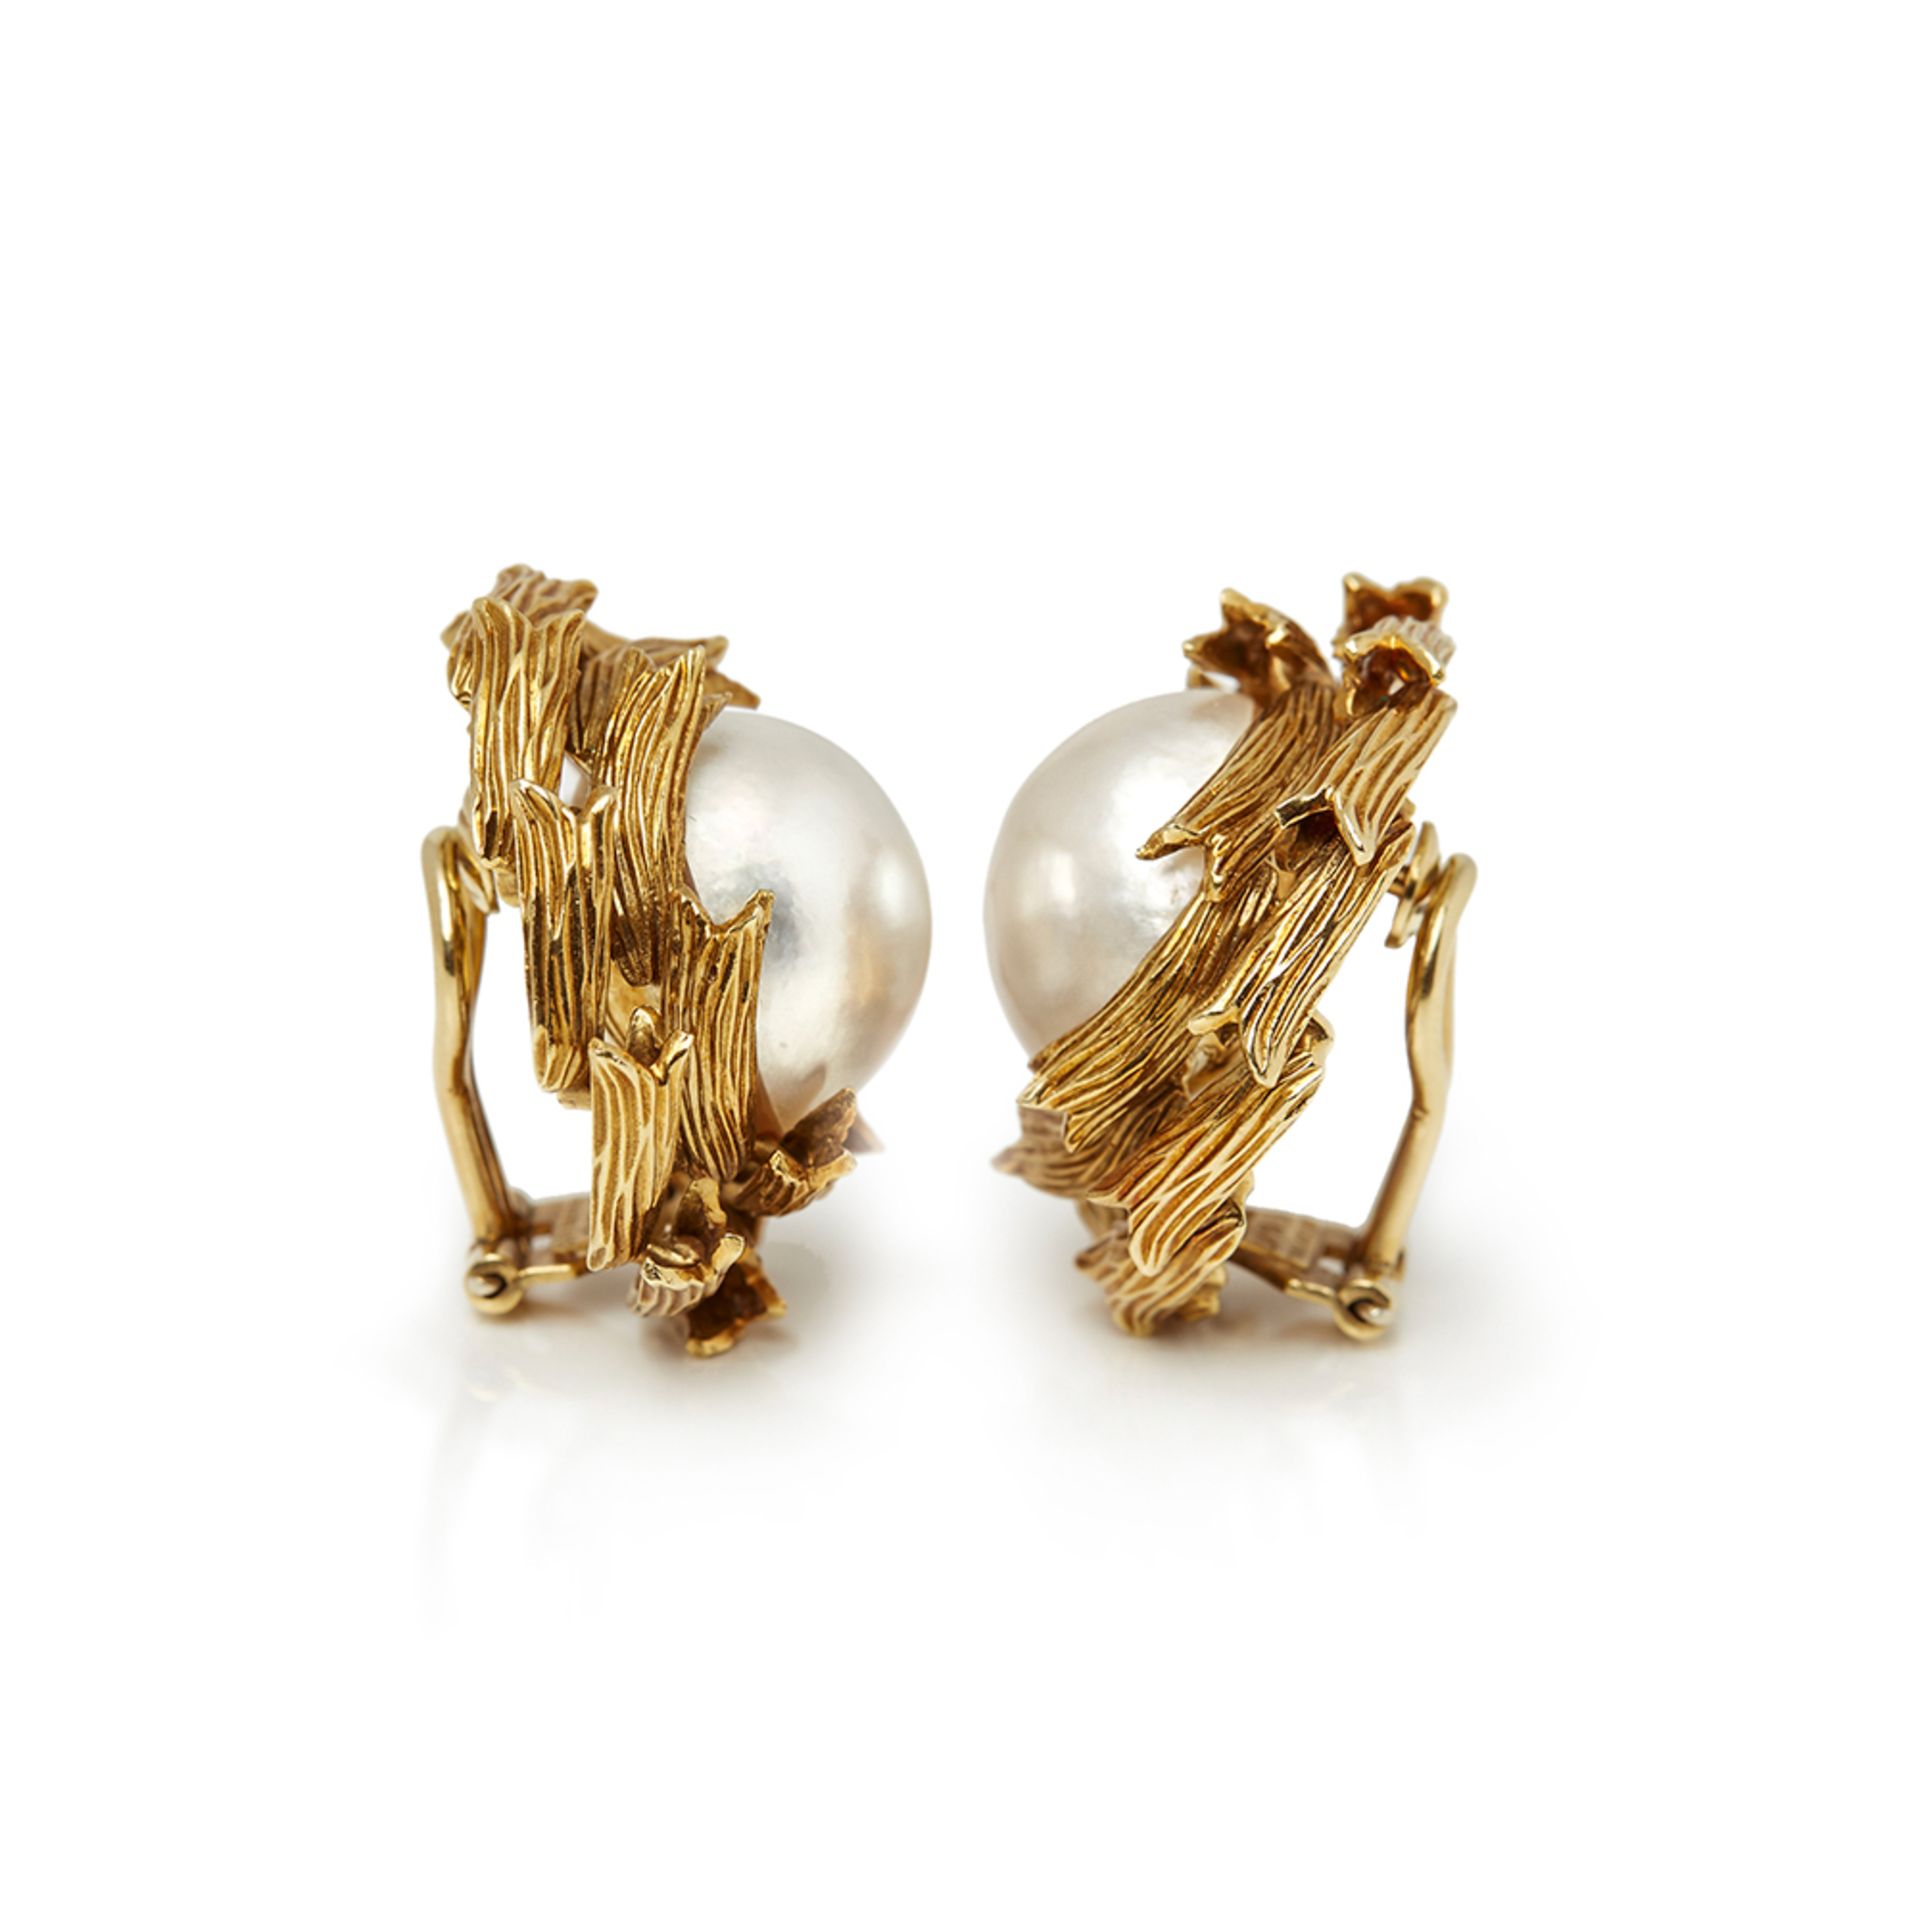 Tiffany & Co. 18k Yellow Gold Mabe Pearl Earrings - Image 2 of 8